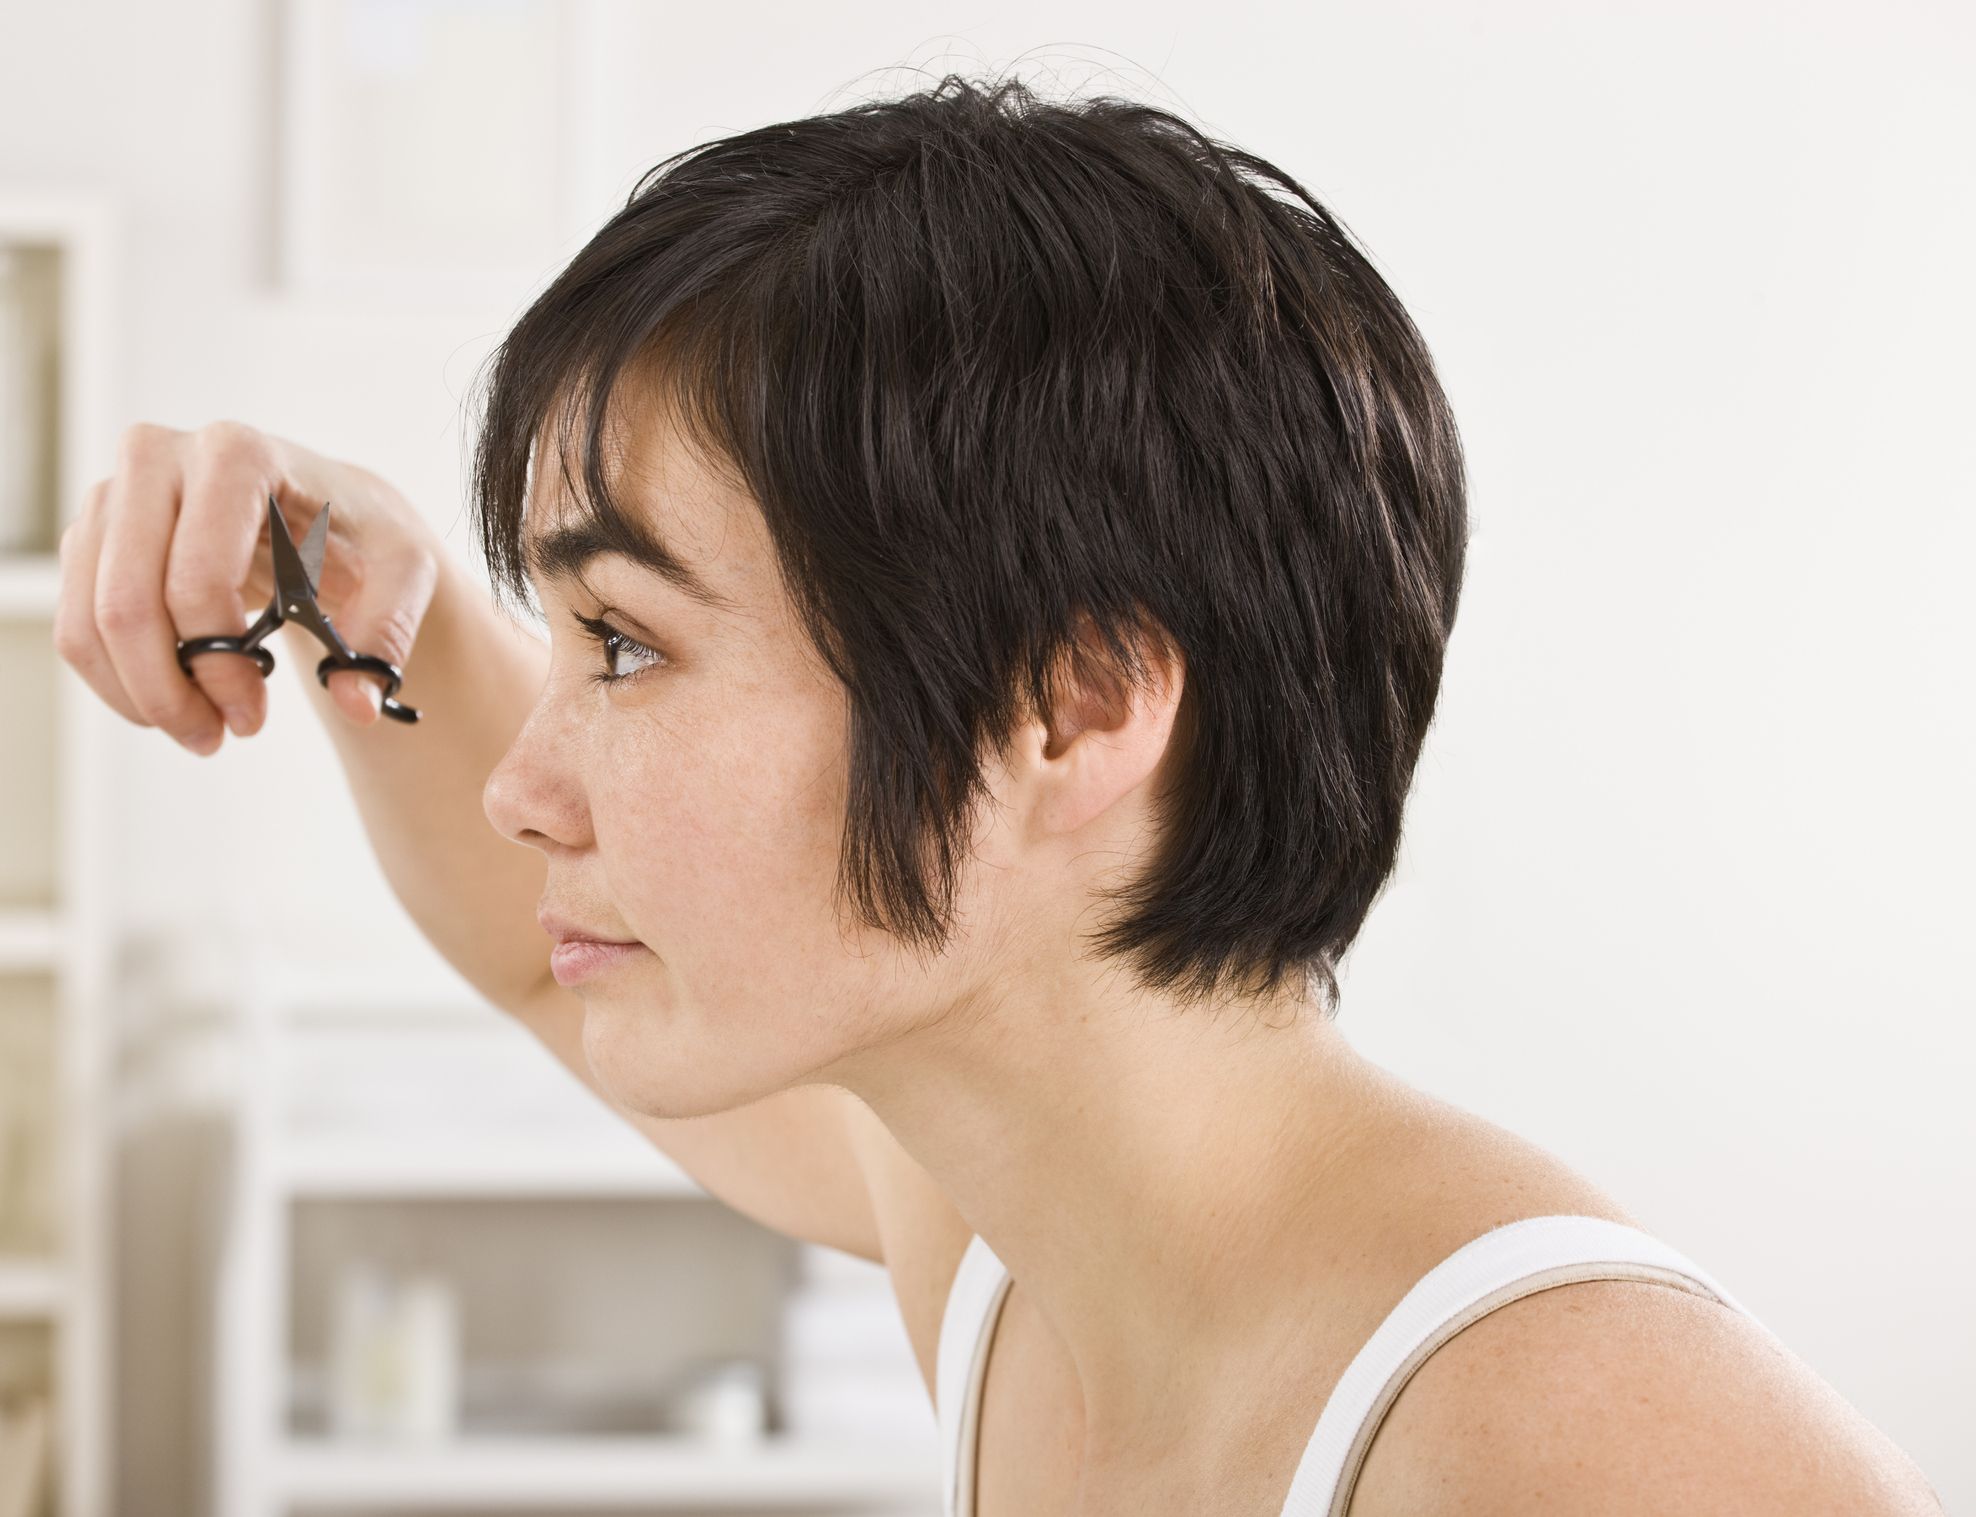 How to Cut Your Bangs at Home: A Step-by-Step Hair Guide